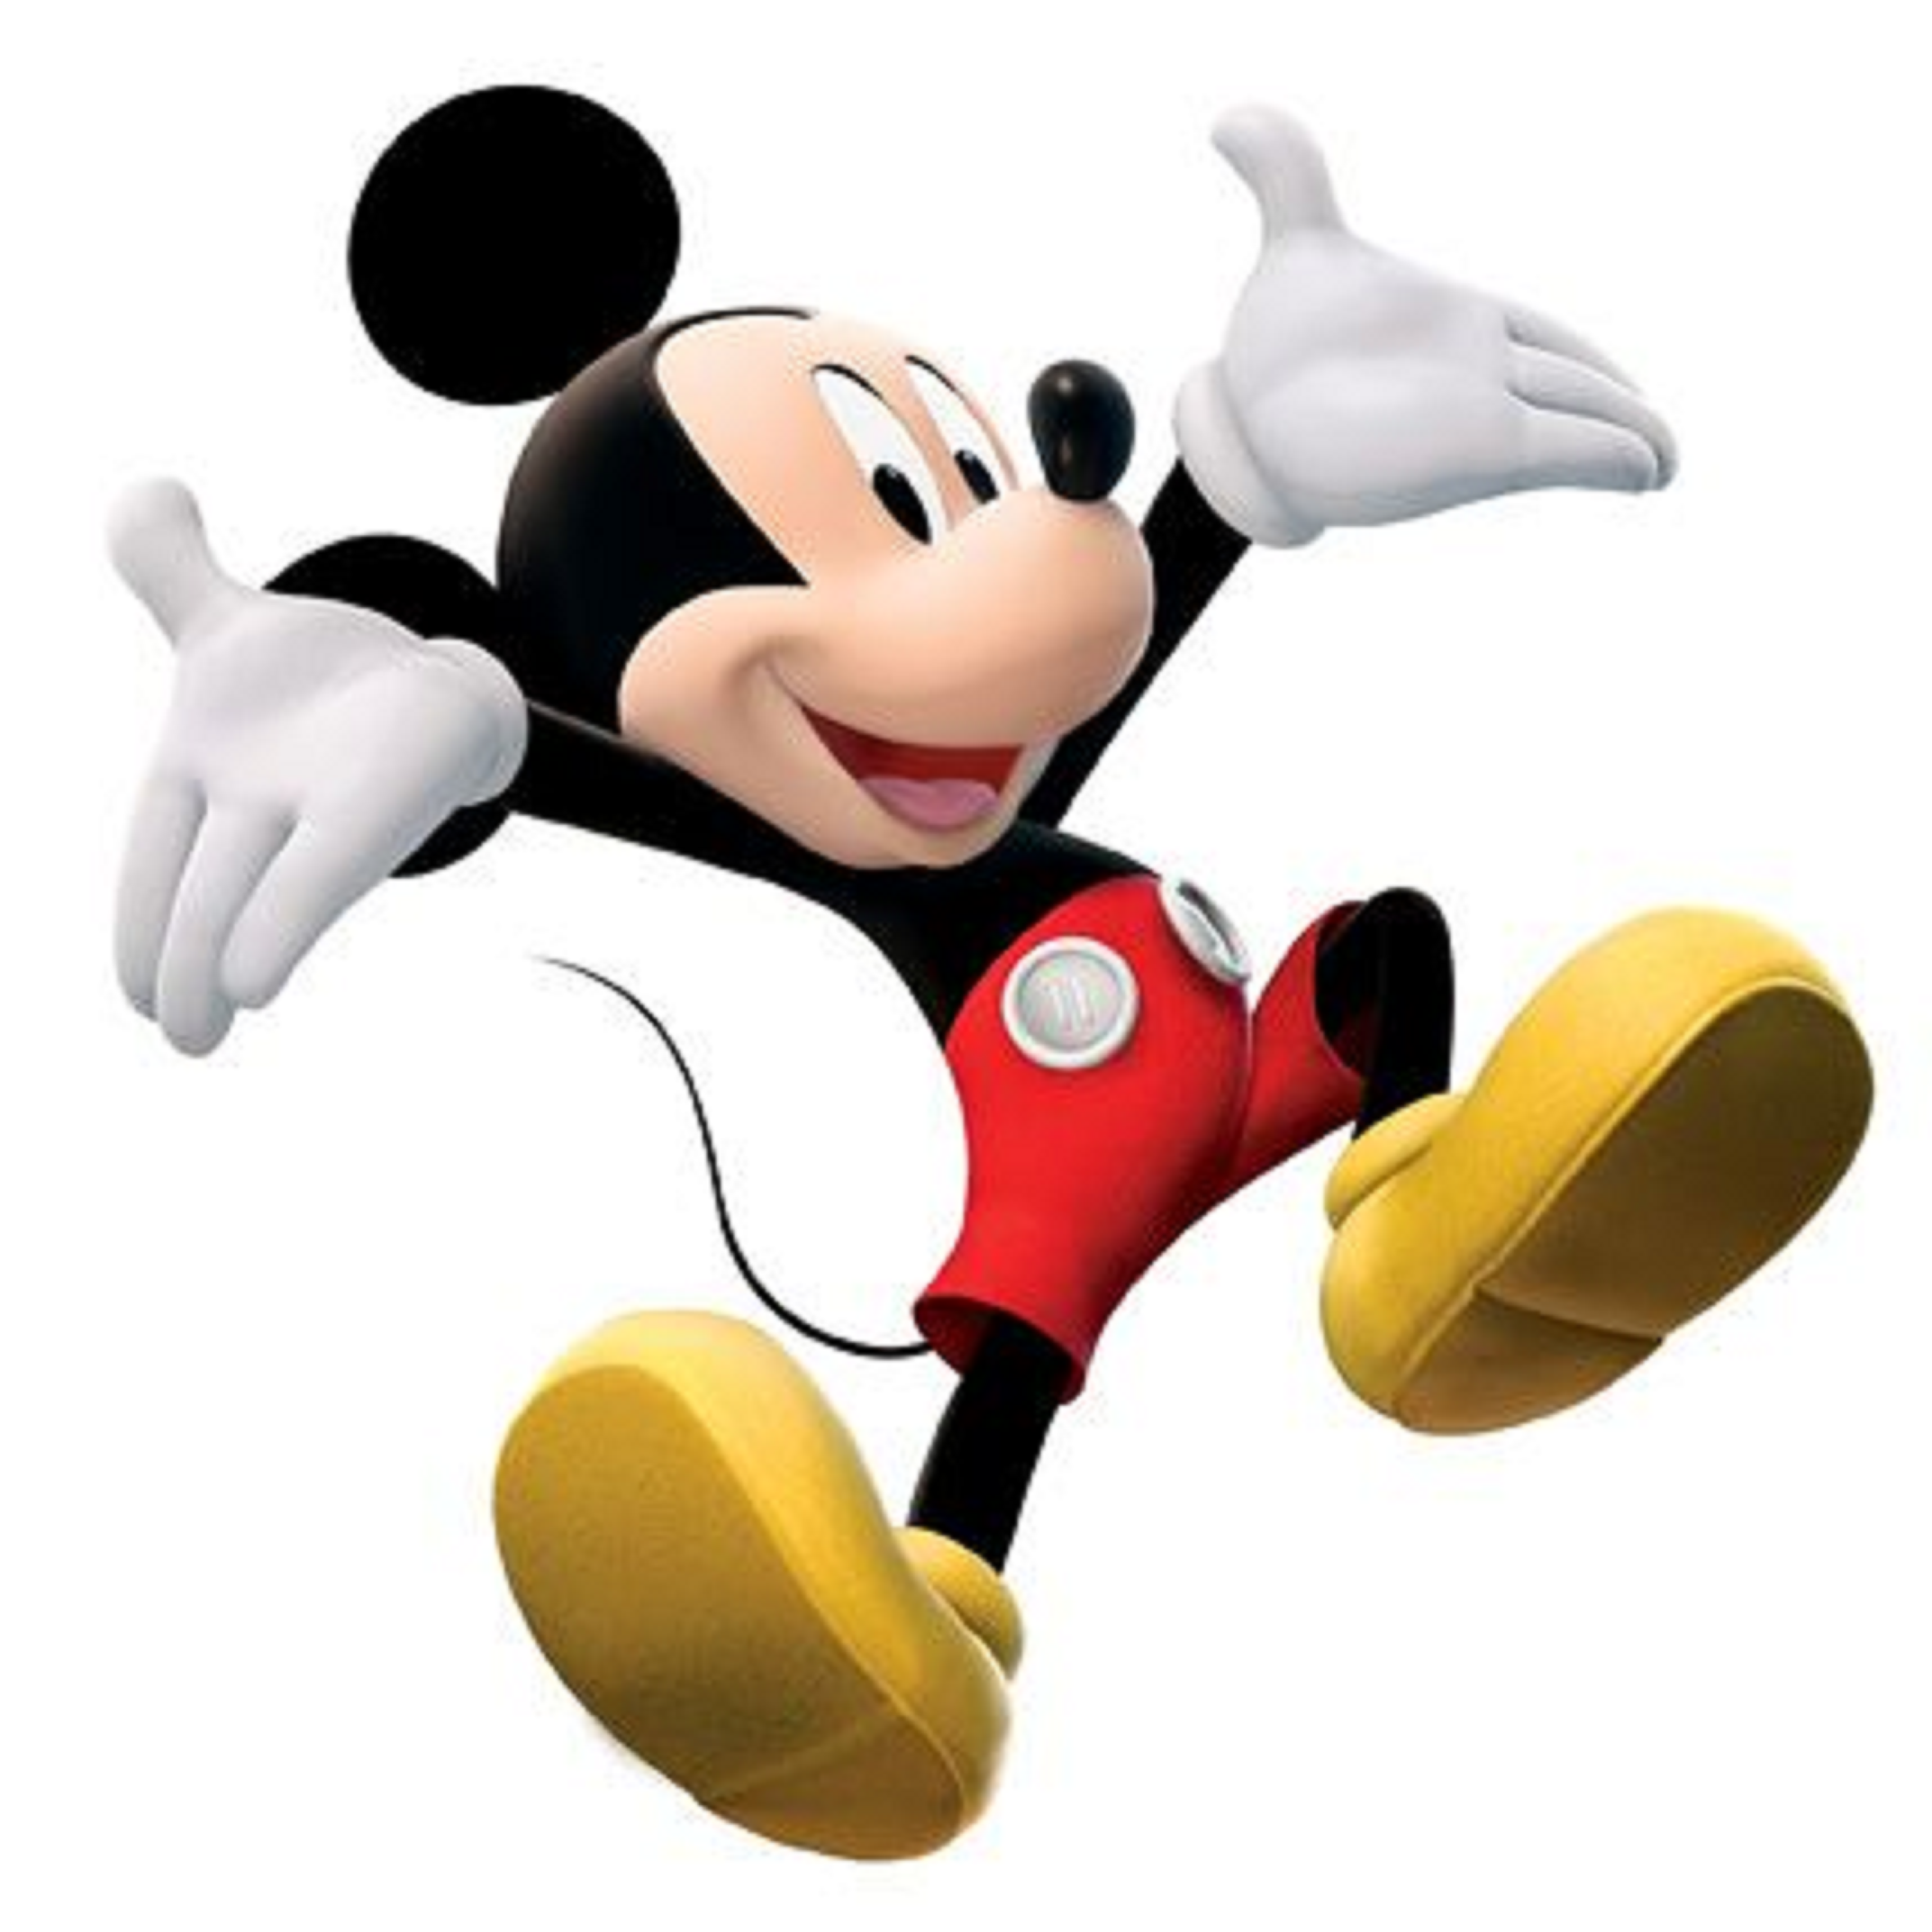 Download Mickey Mouse Clubhouse Vector | Free download best Mickey Mouse Clubhouse Vector on ClipArtMag.com